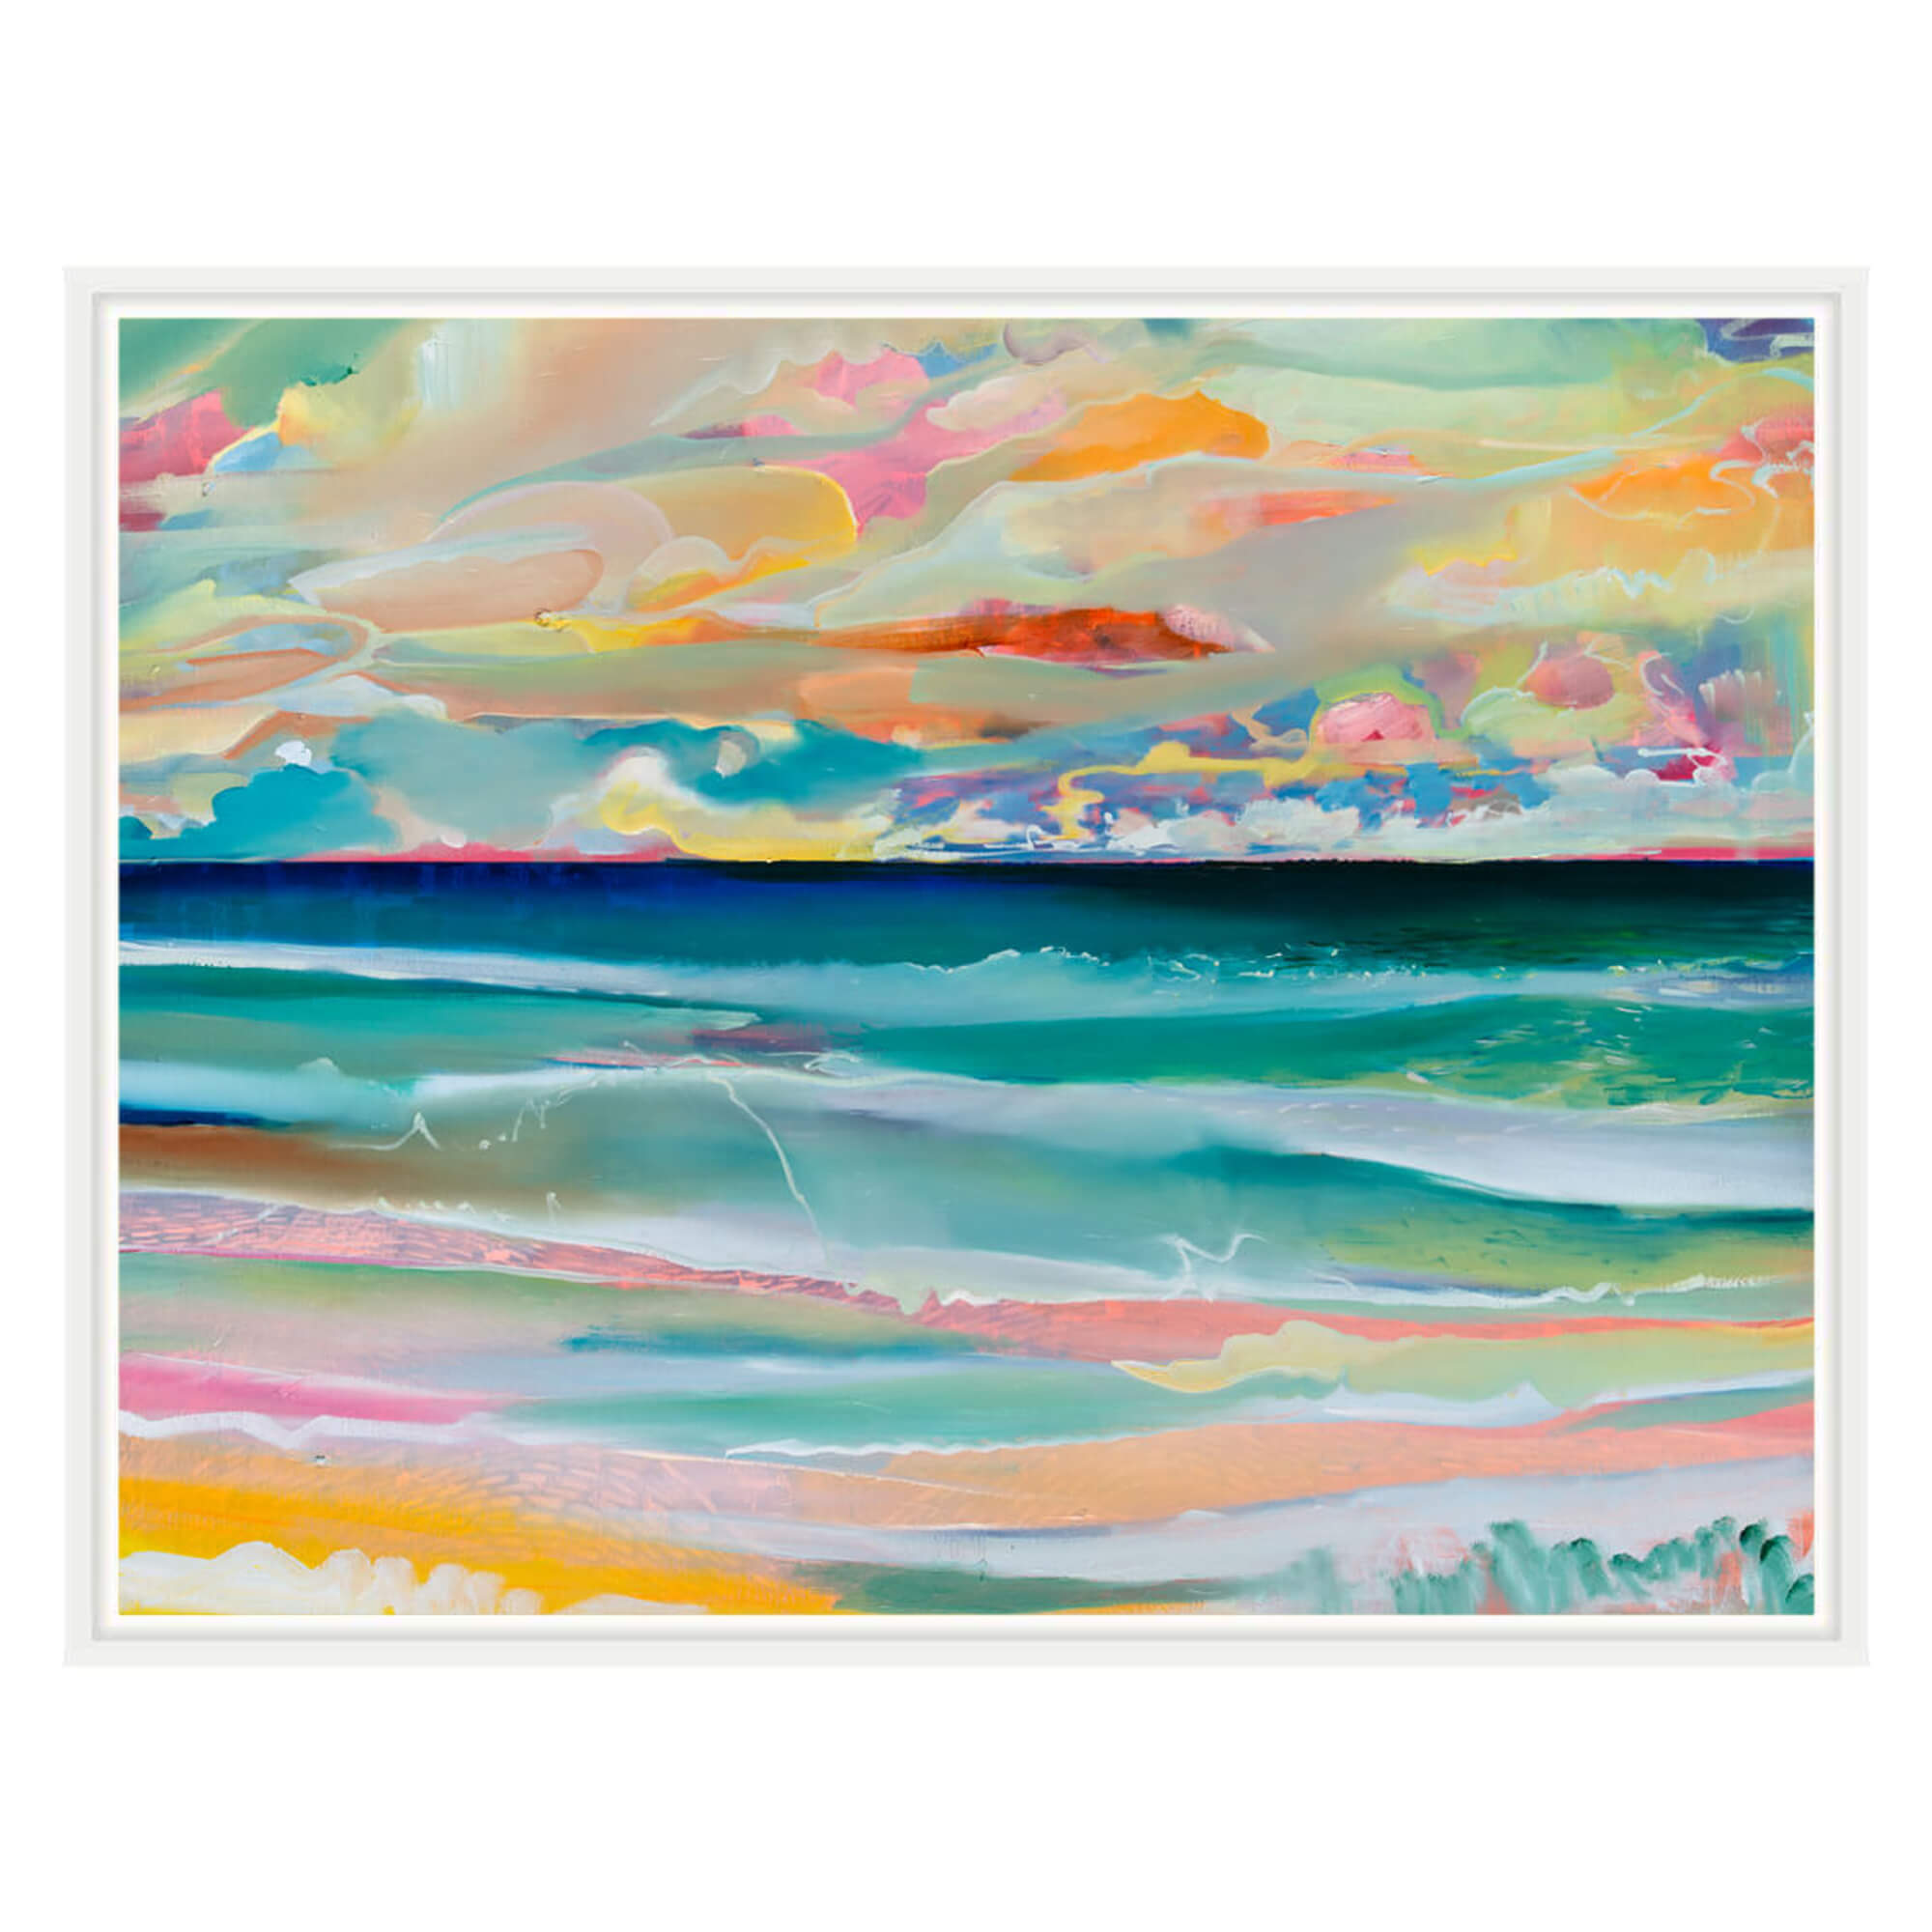 Framed canvas art print of an abstract artwork of a seascape with pink, yellow and teal hues by Hawaii artist Saumolia Puapuaga 